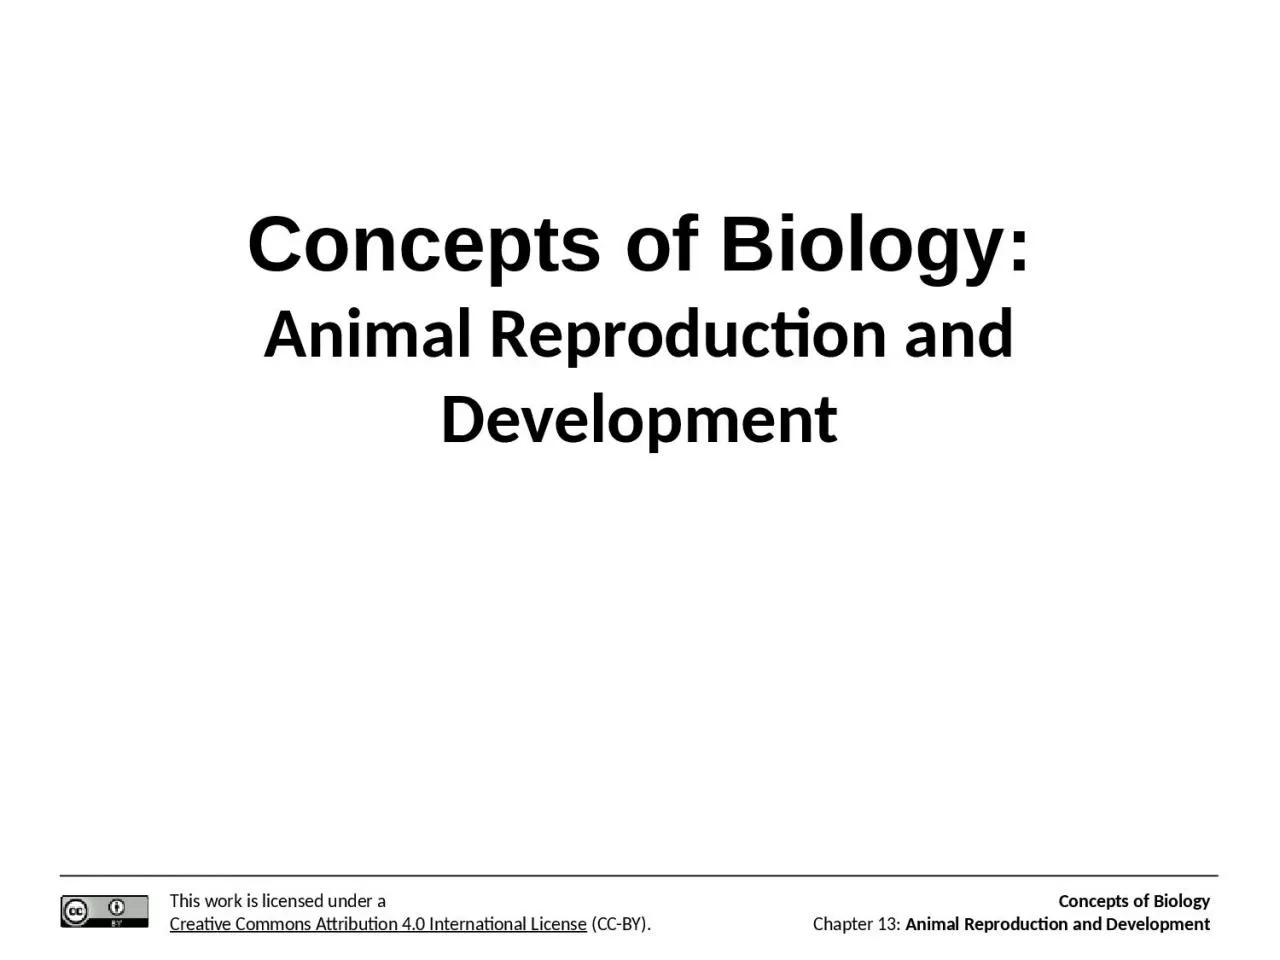 Concepts of Biology: Animal Reproduction and Development